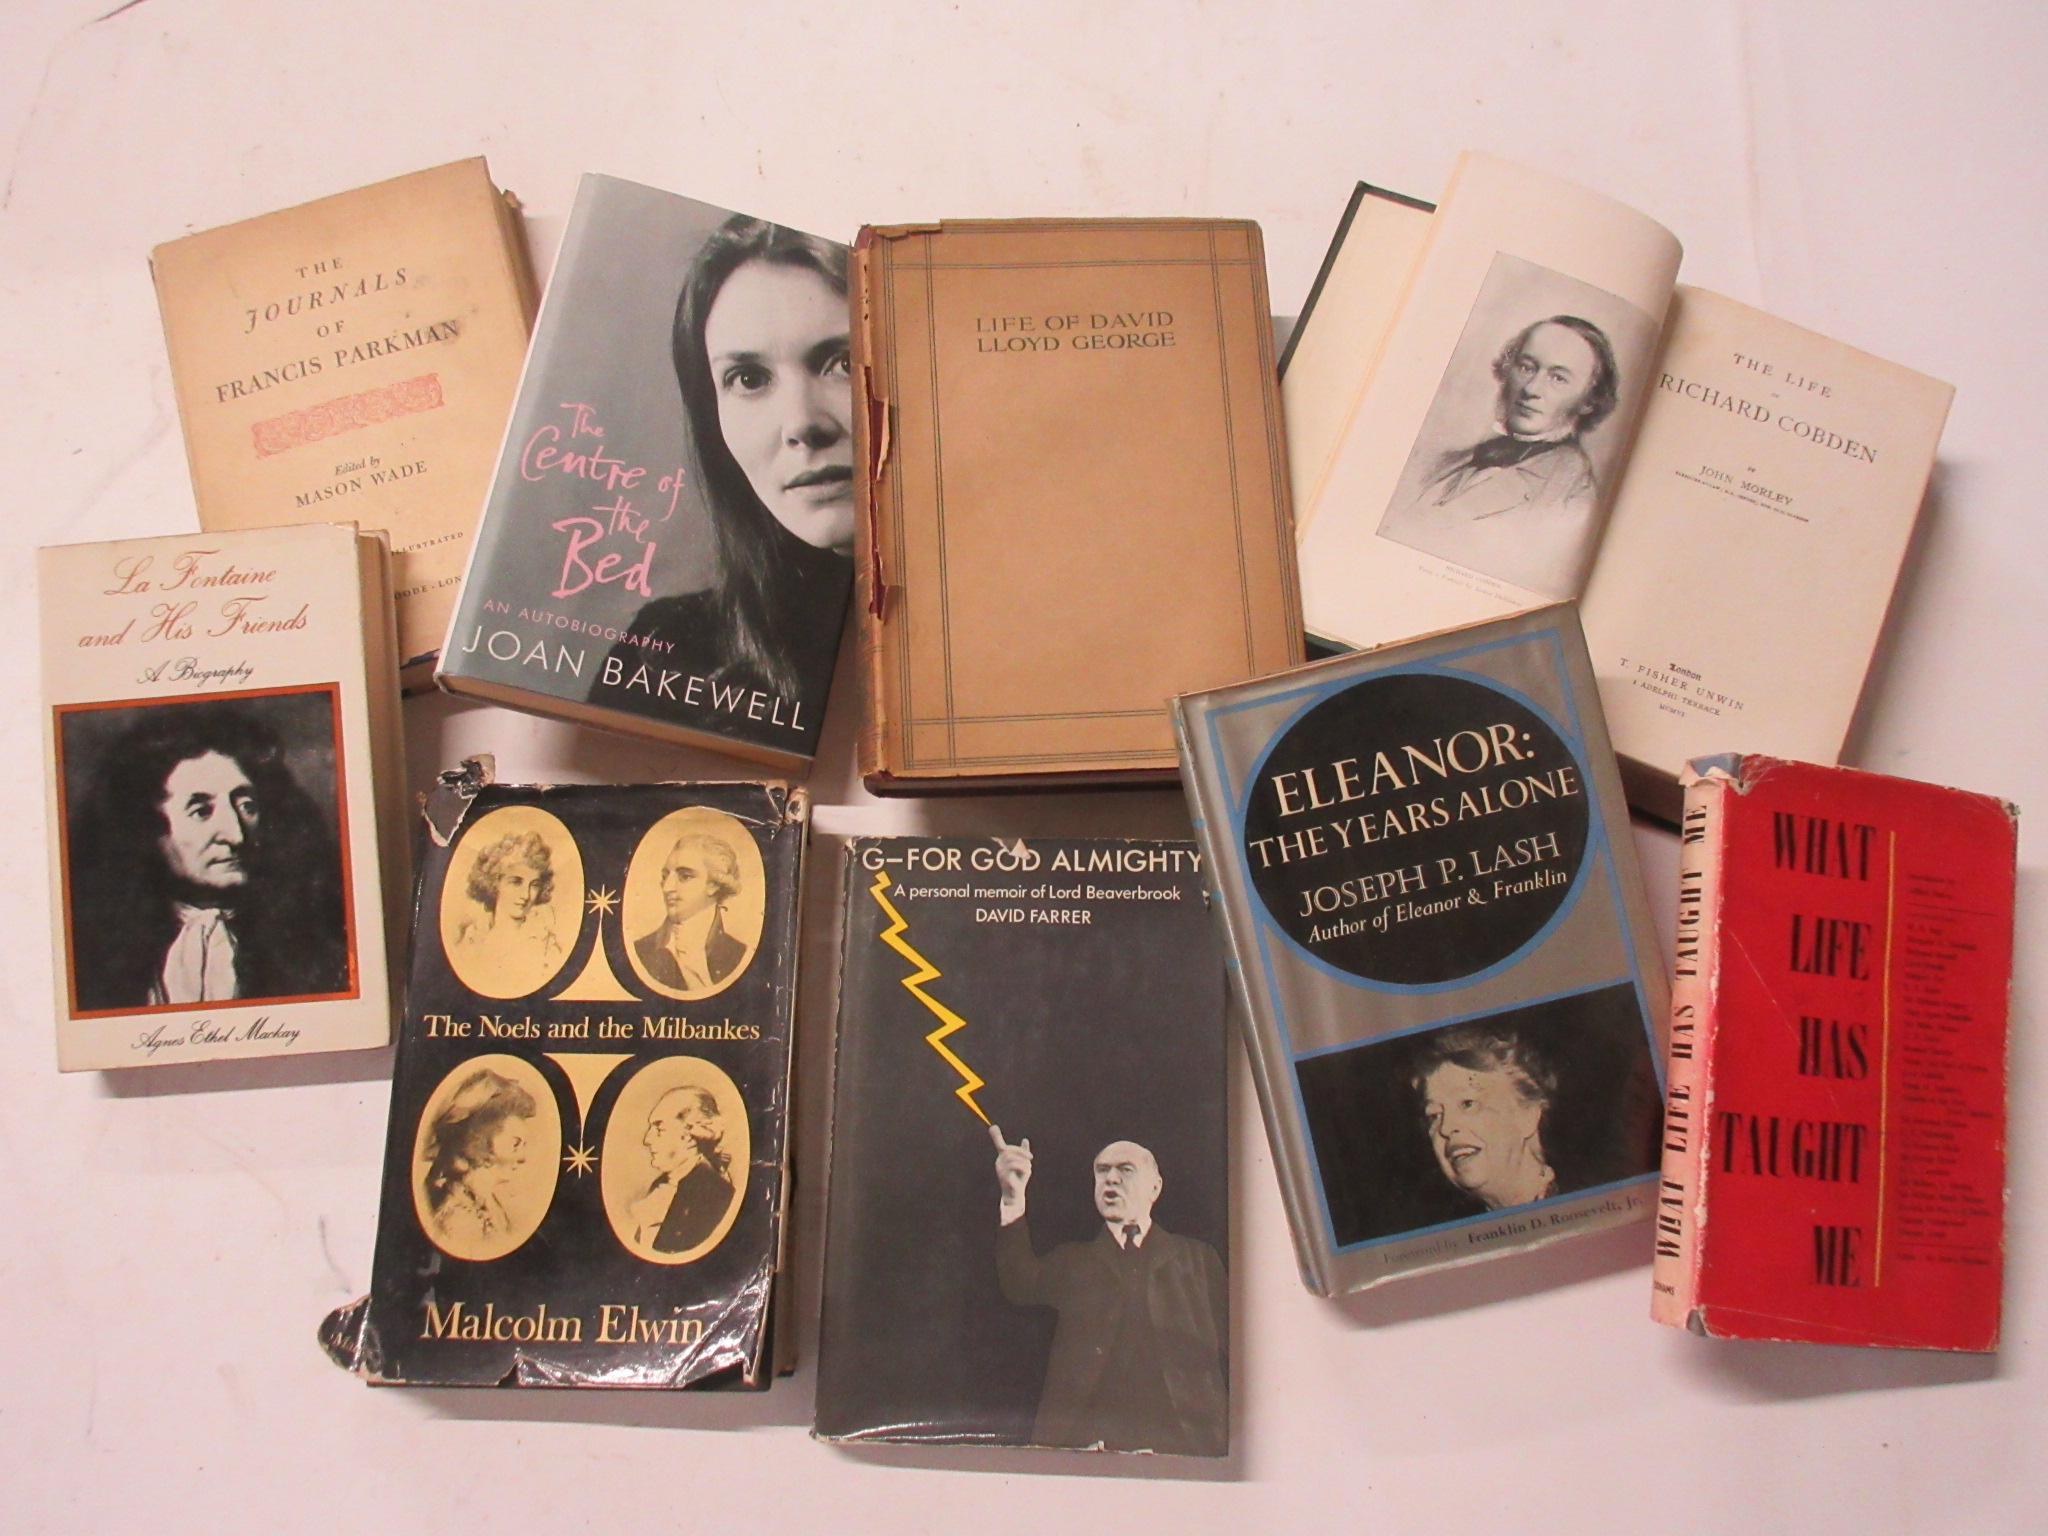 47: authors, bios and books on books 18 titles including JOURNALS OF FRANCIS PARKMAN + JOHN